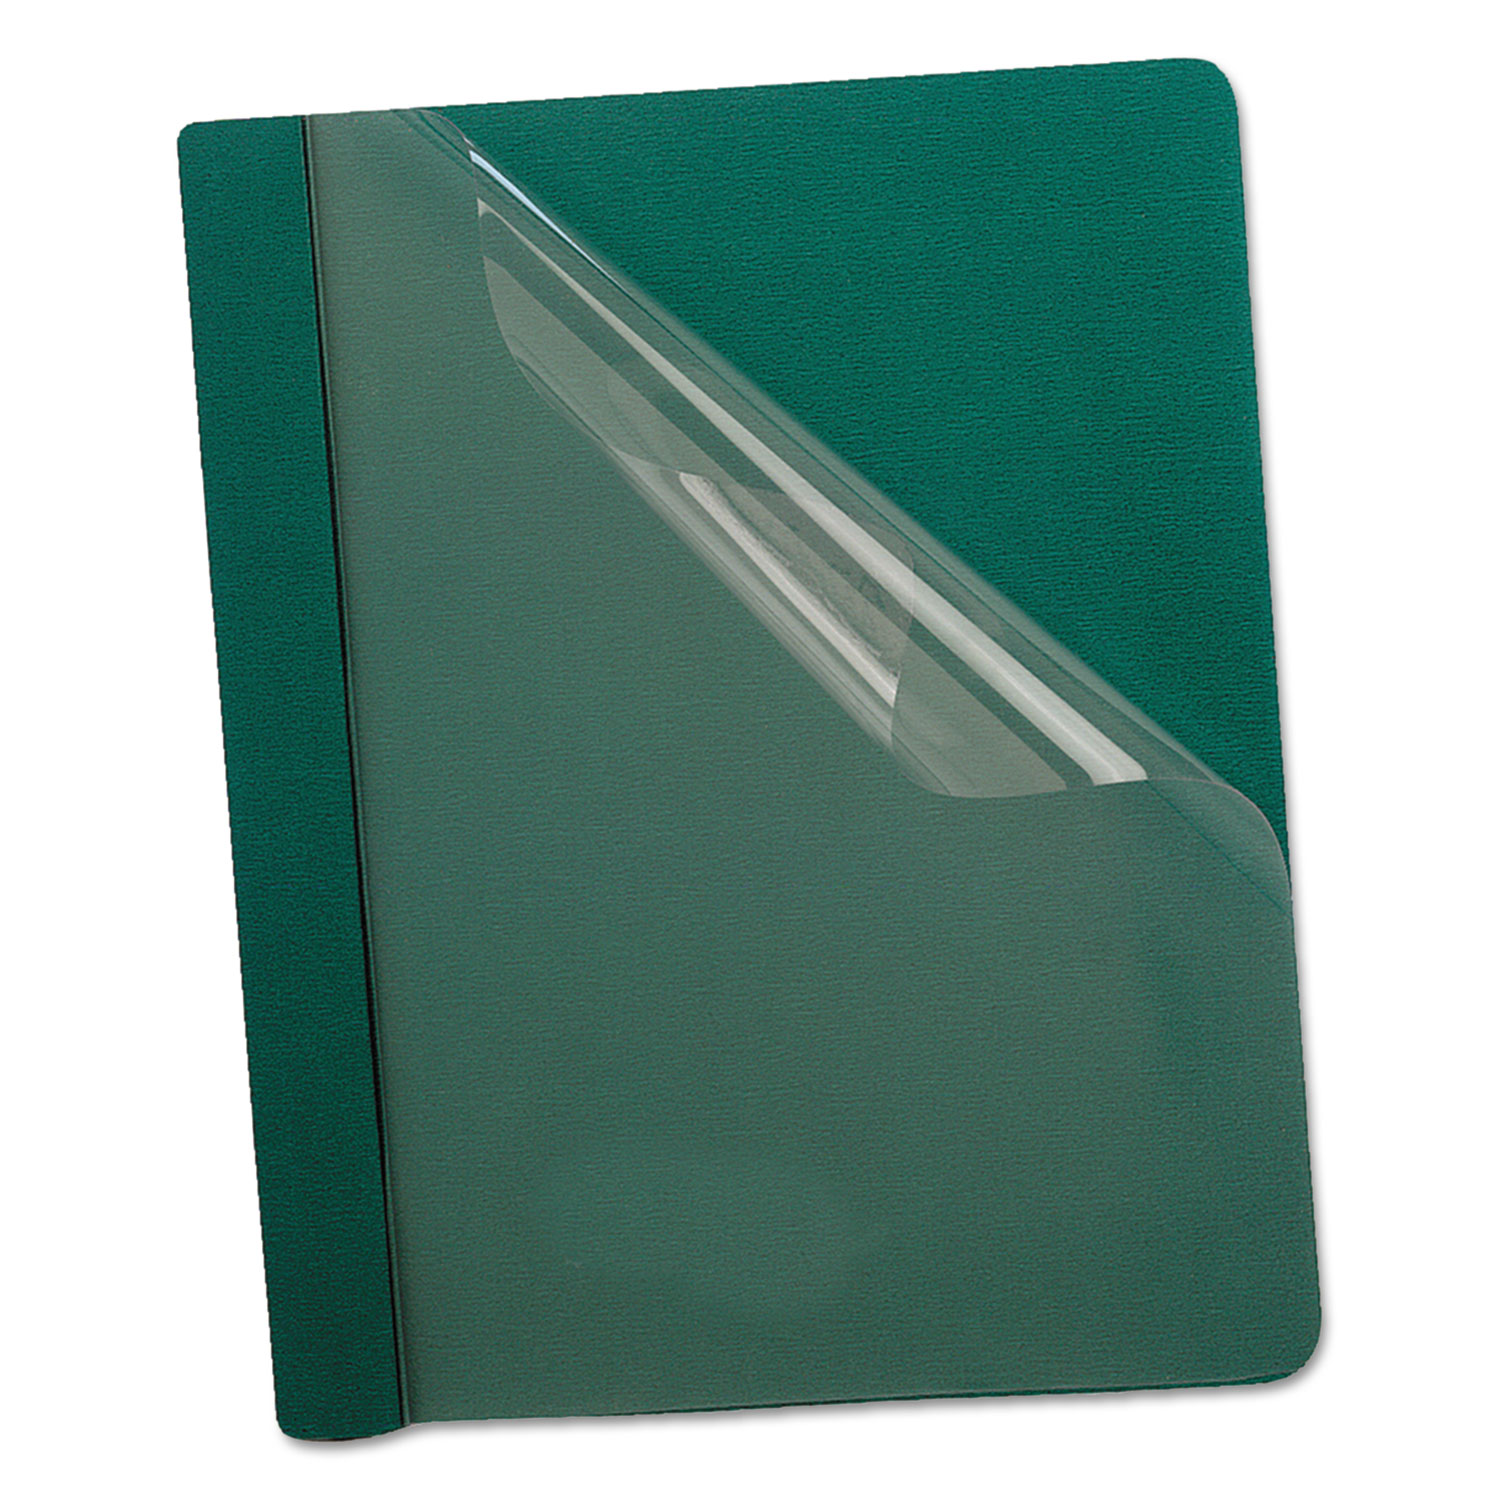 Premium Paper Clear Front Cover, 3 Fasteners, Letter, Green, 25/Box